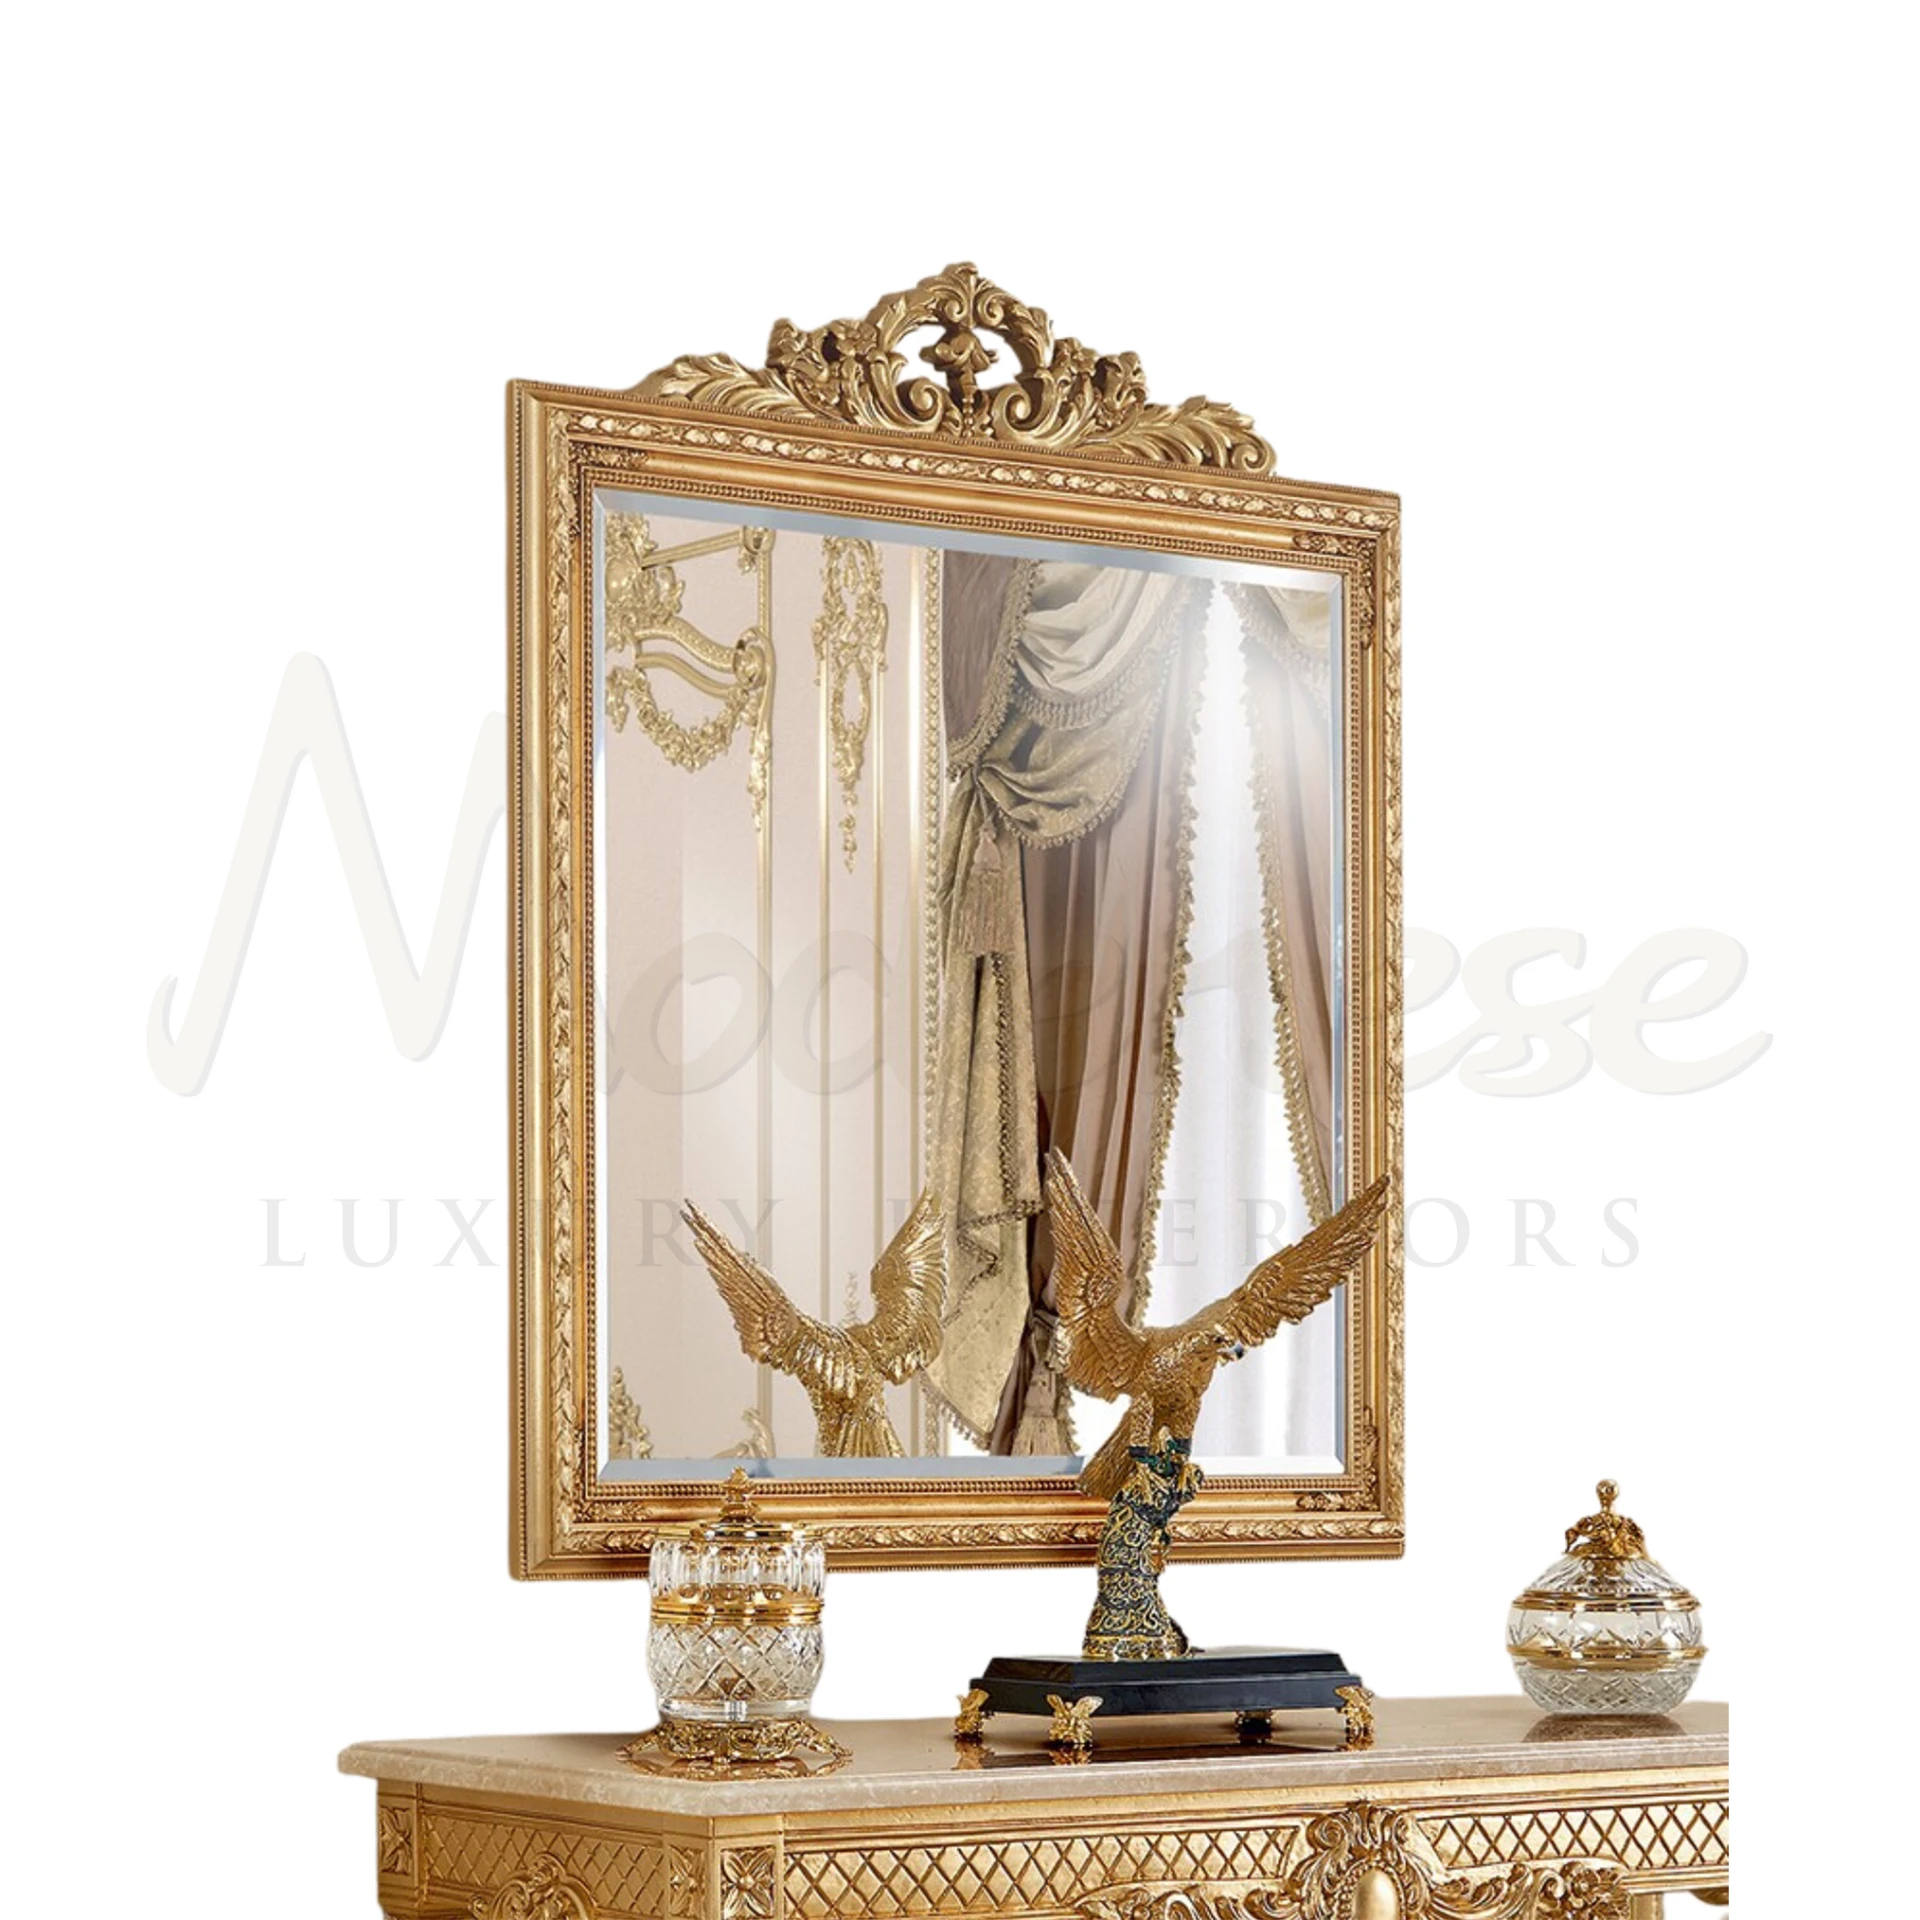 Noble Gold Leaf Mirror with classic botanical detailing, blending baroque and antique styles for a luxurious interior design statement.